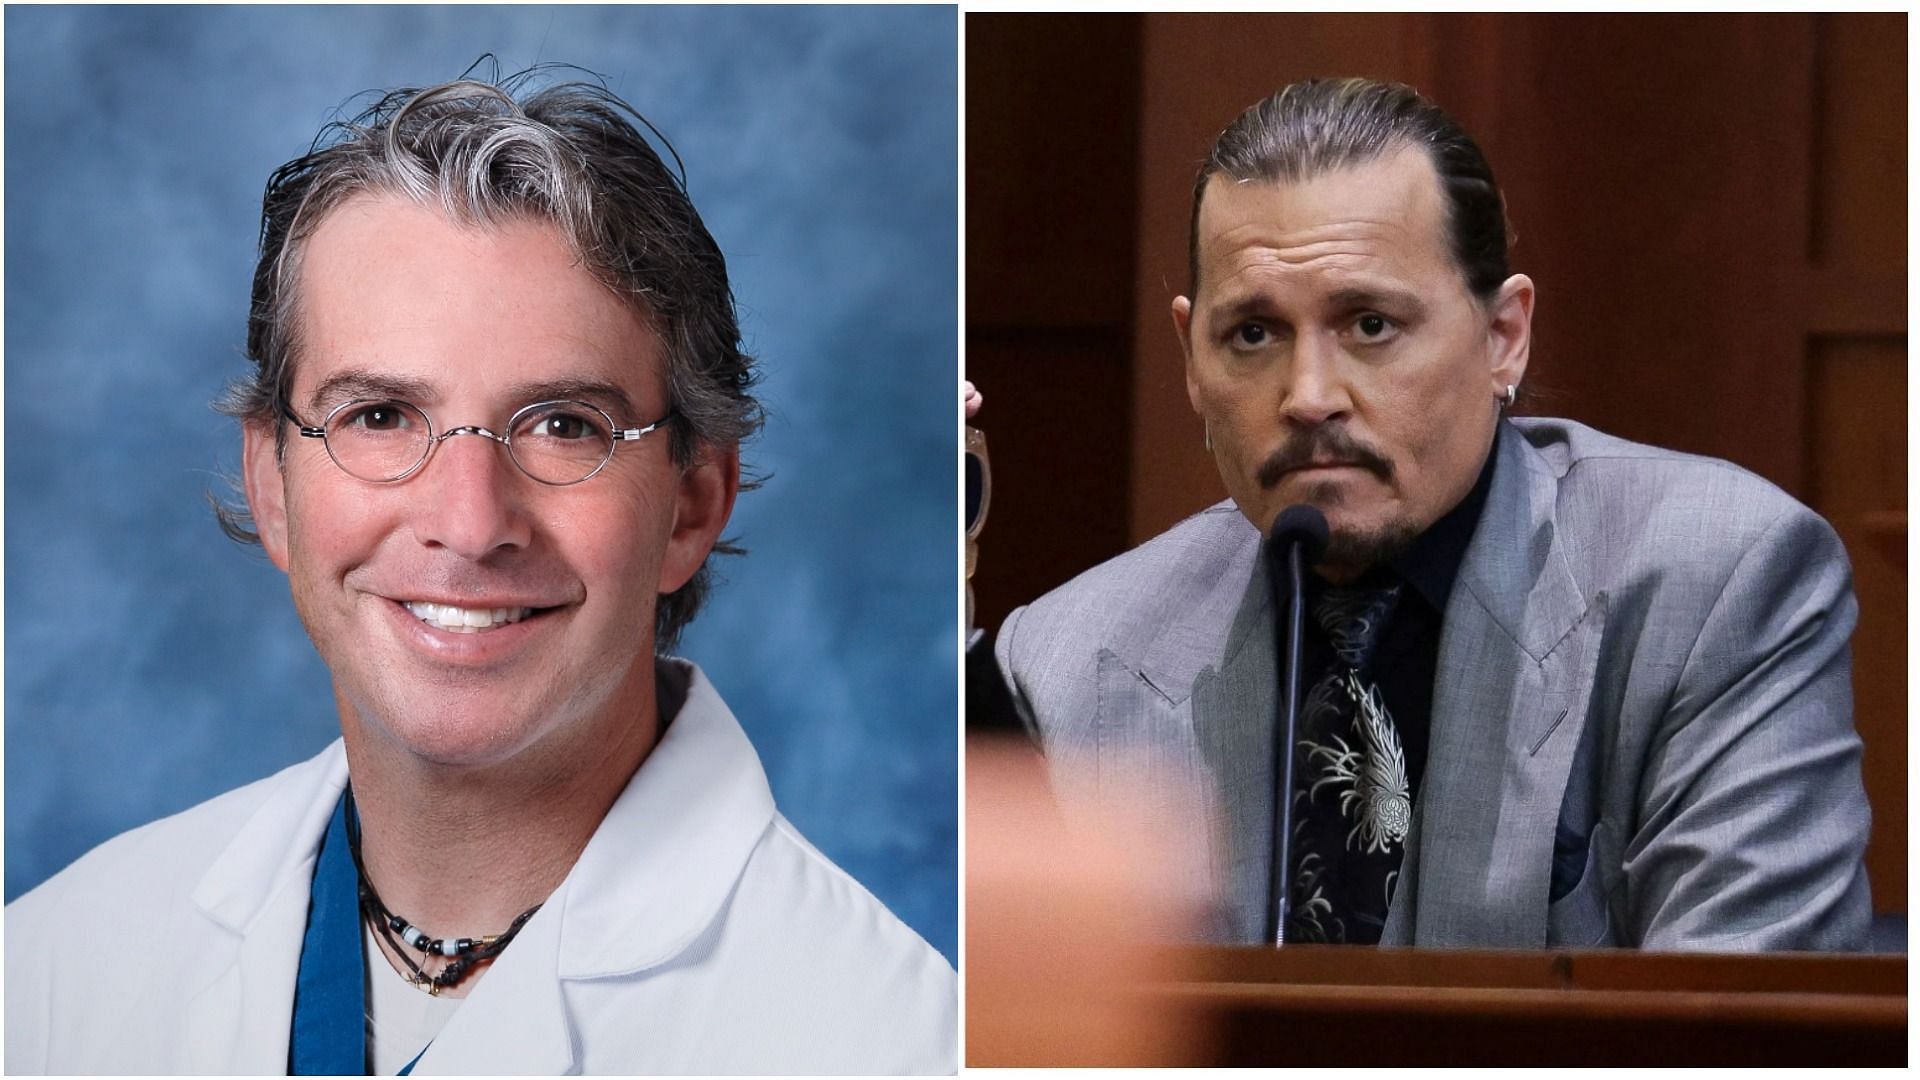 Dr. David Kulber and Johnny Depp in the trial (Image via Cedars-Sinai and Evelyn Hockstein/AFP/Getty Images)